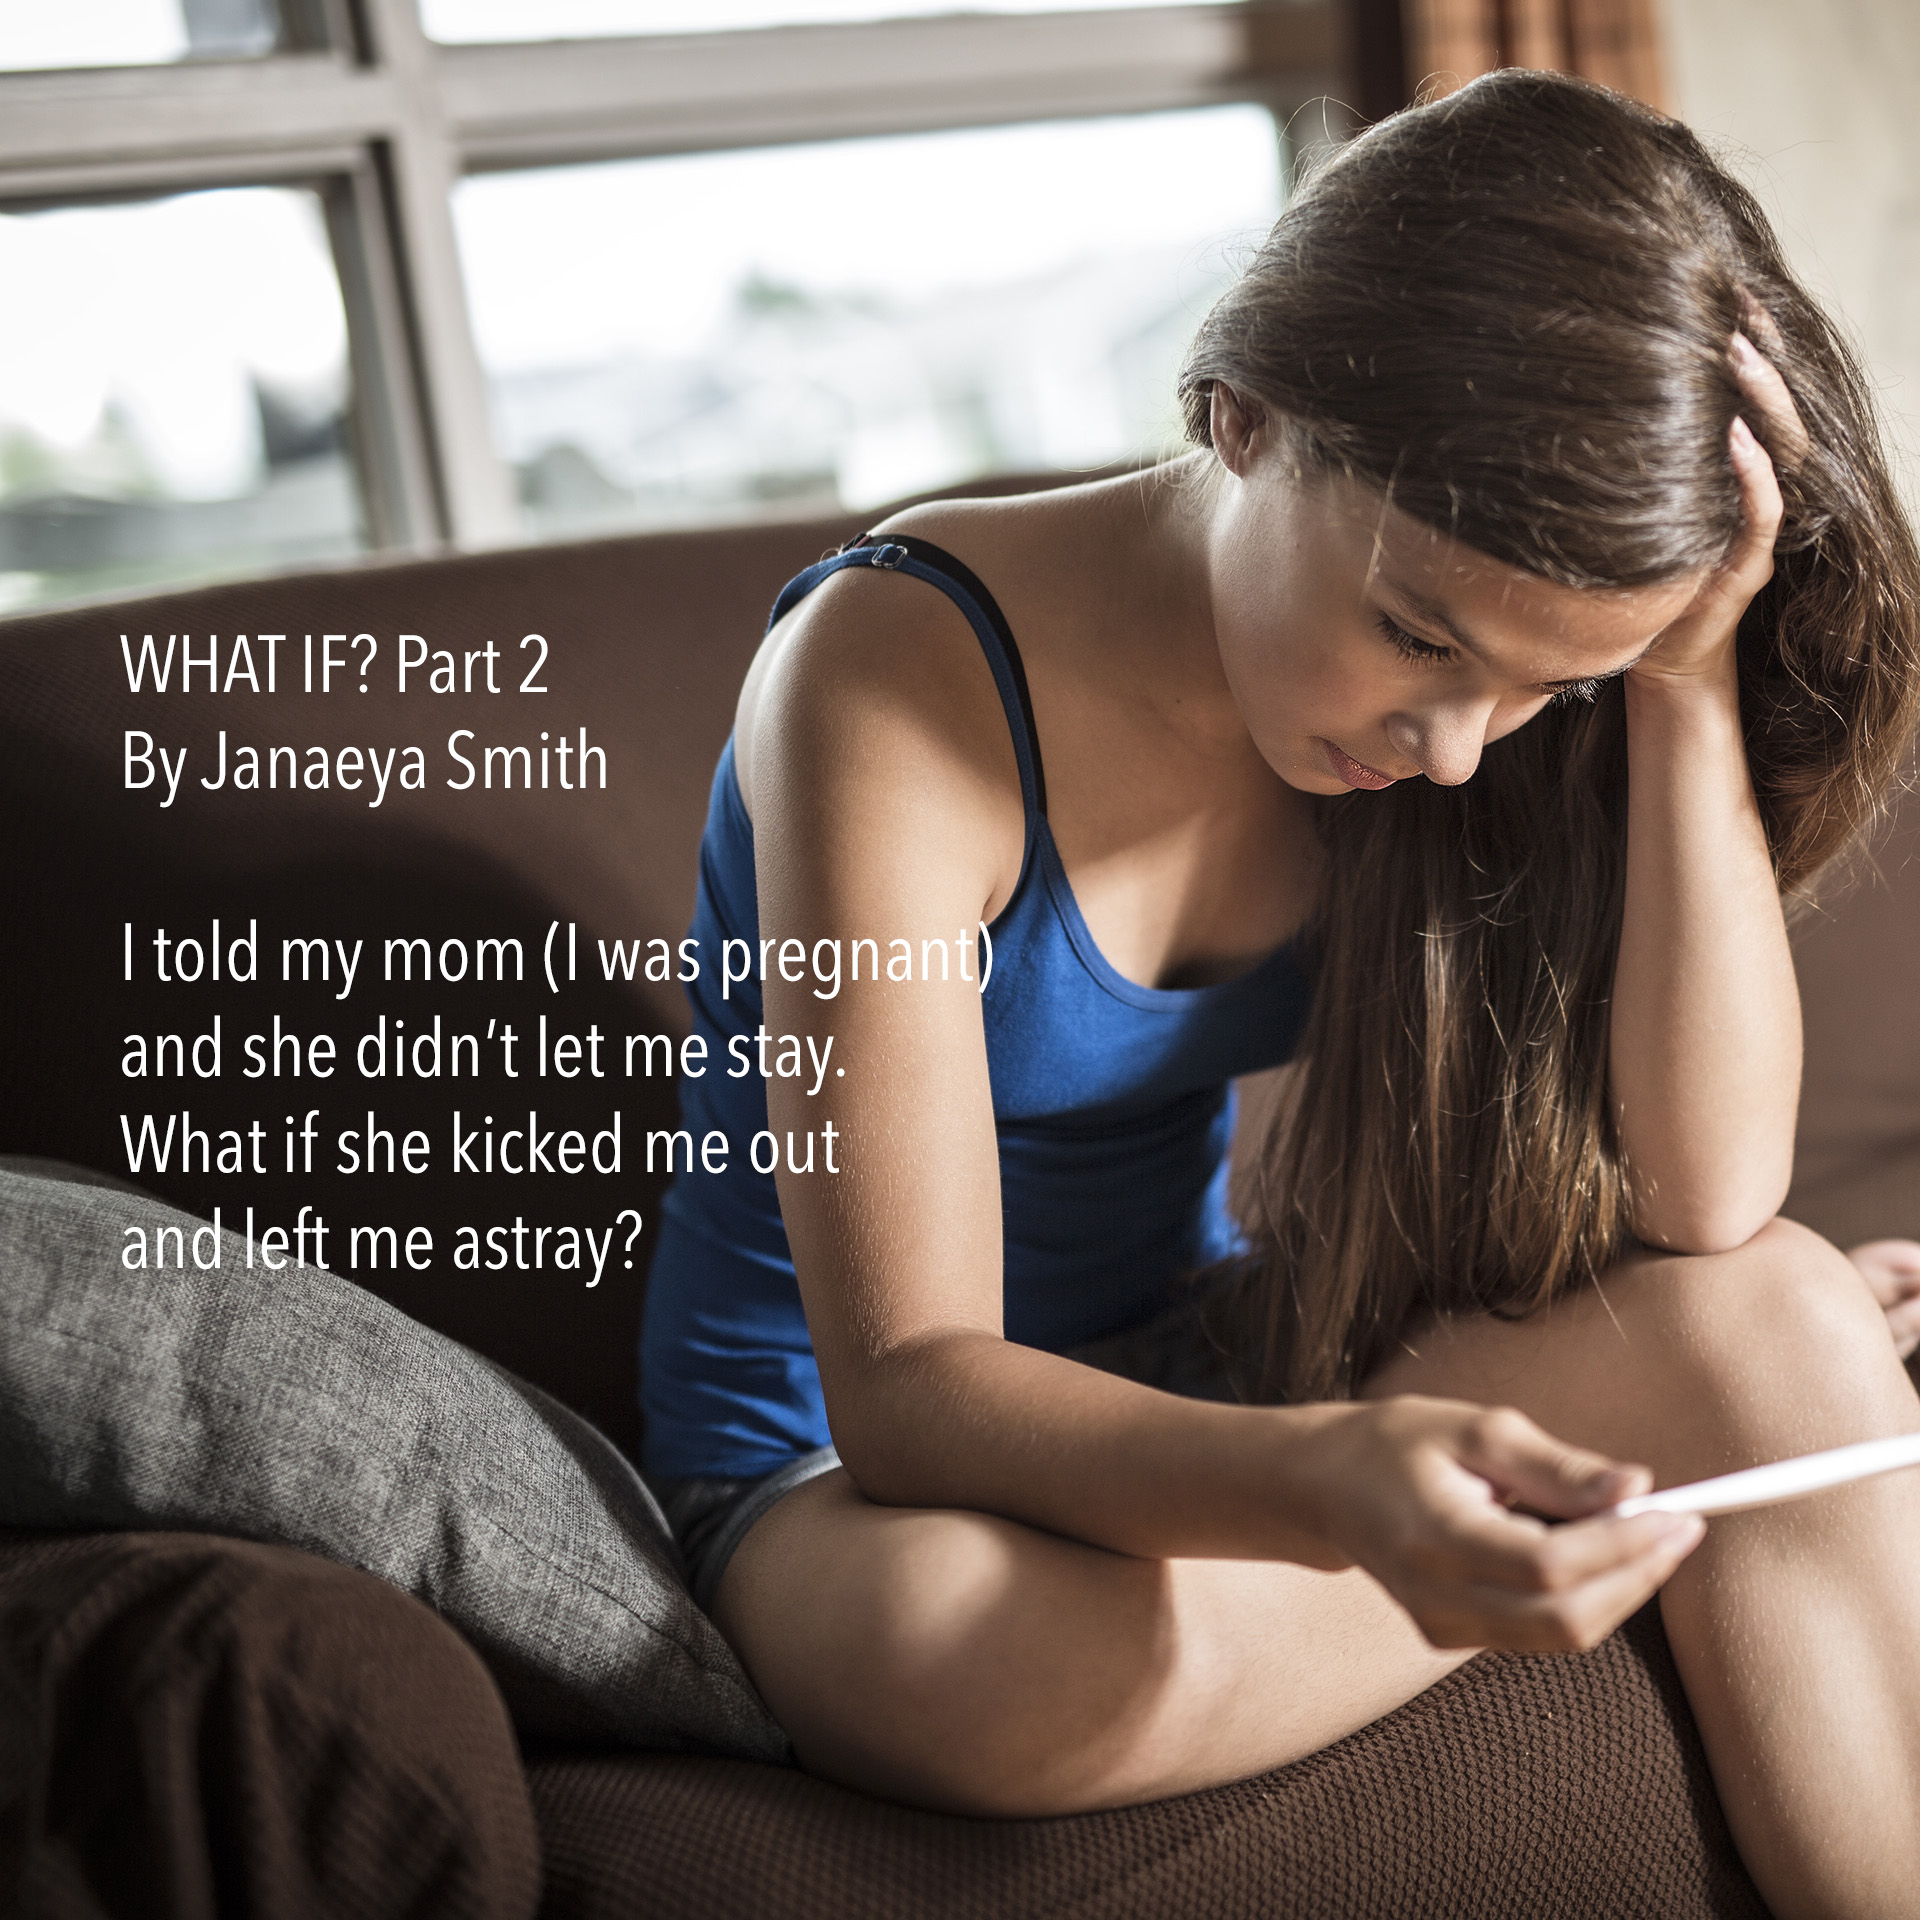 WHAT IF? Part 2 – By Janaeya Smith